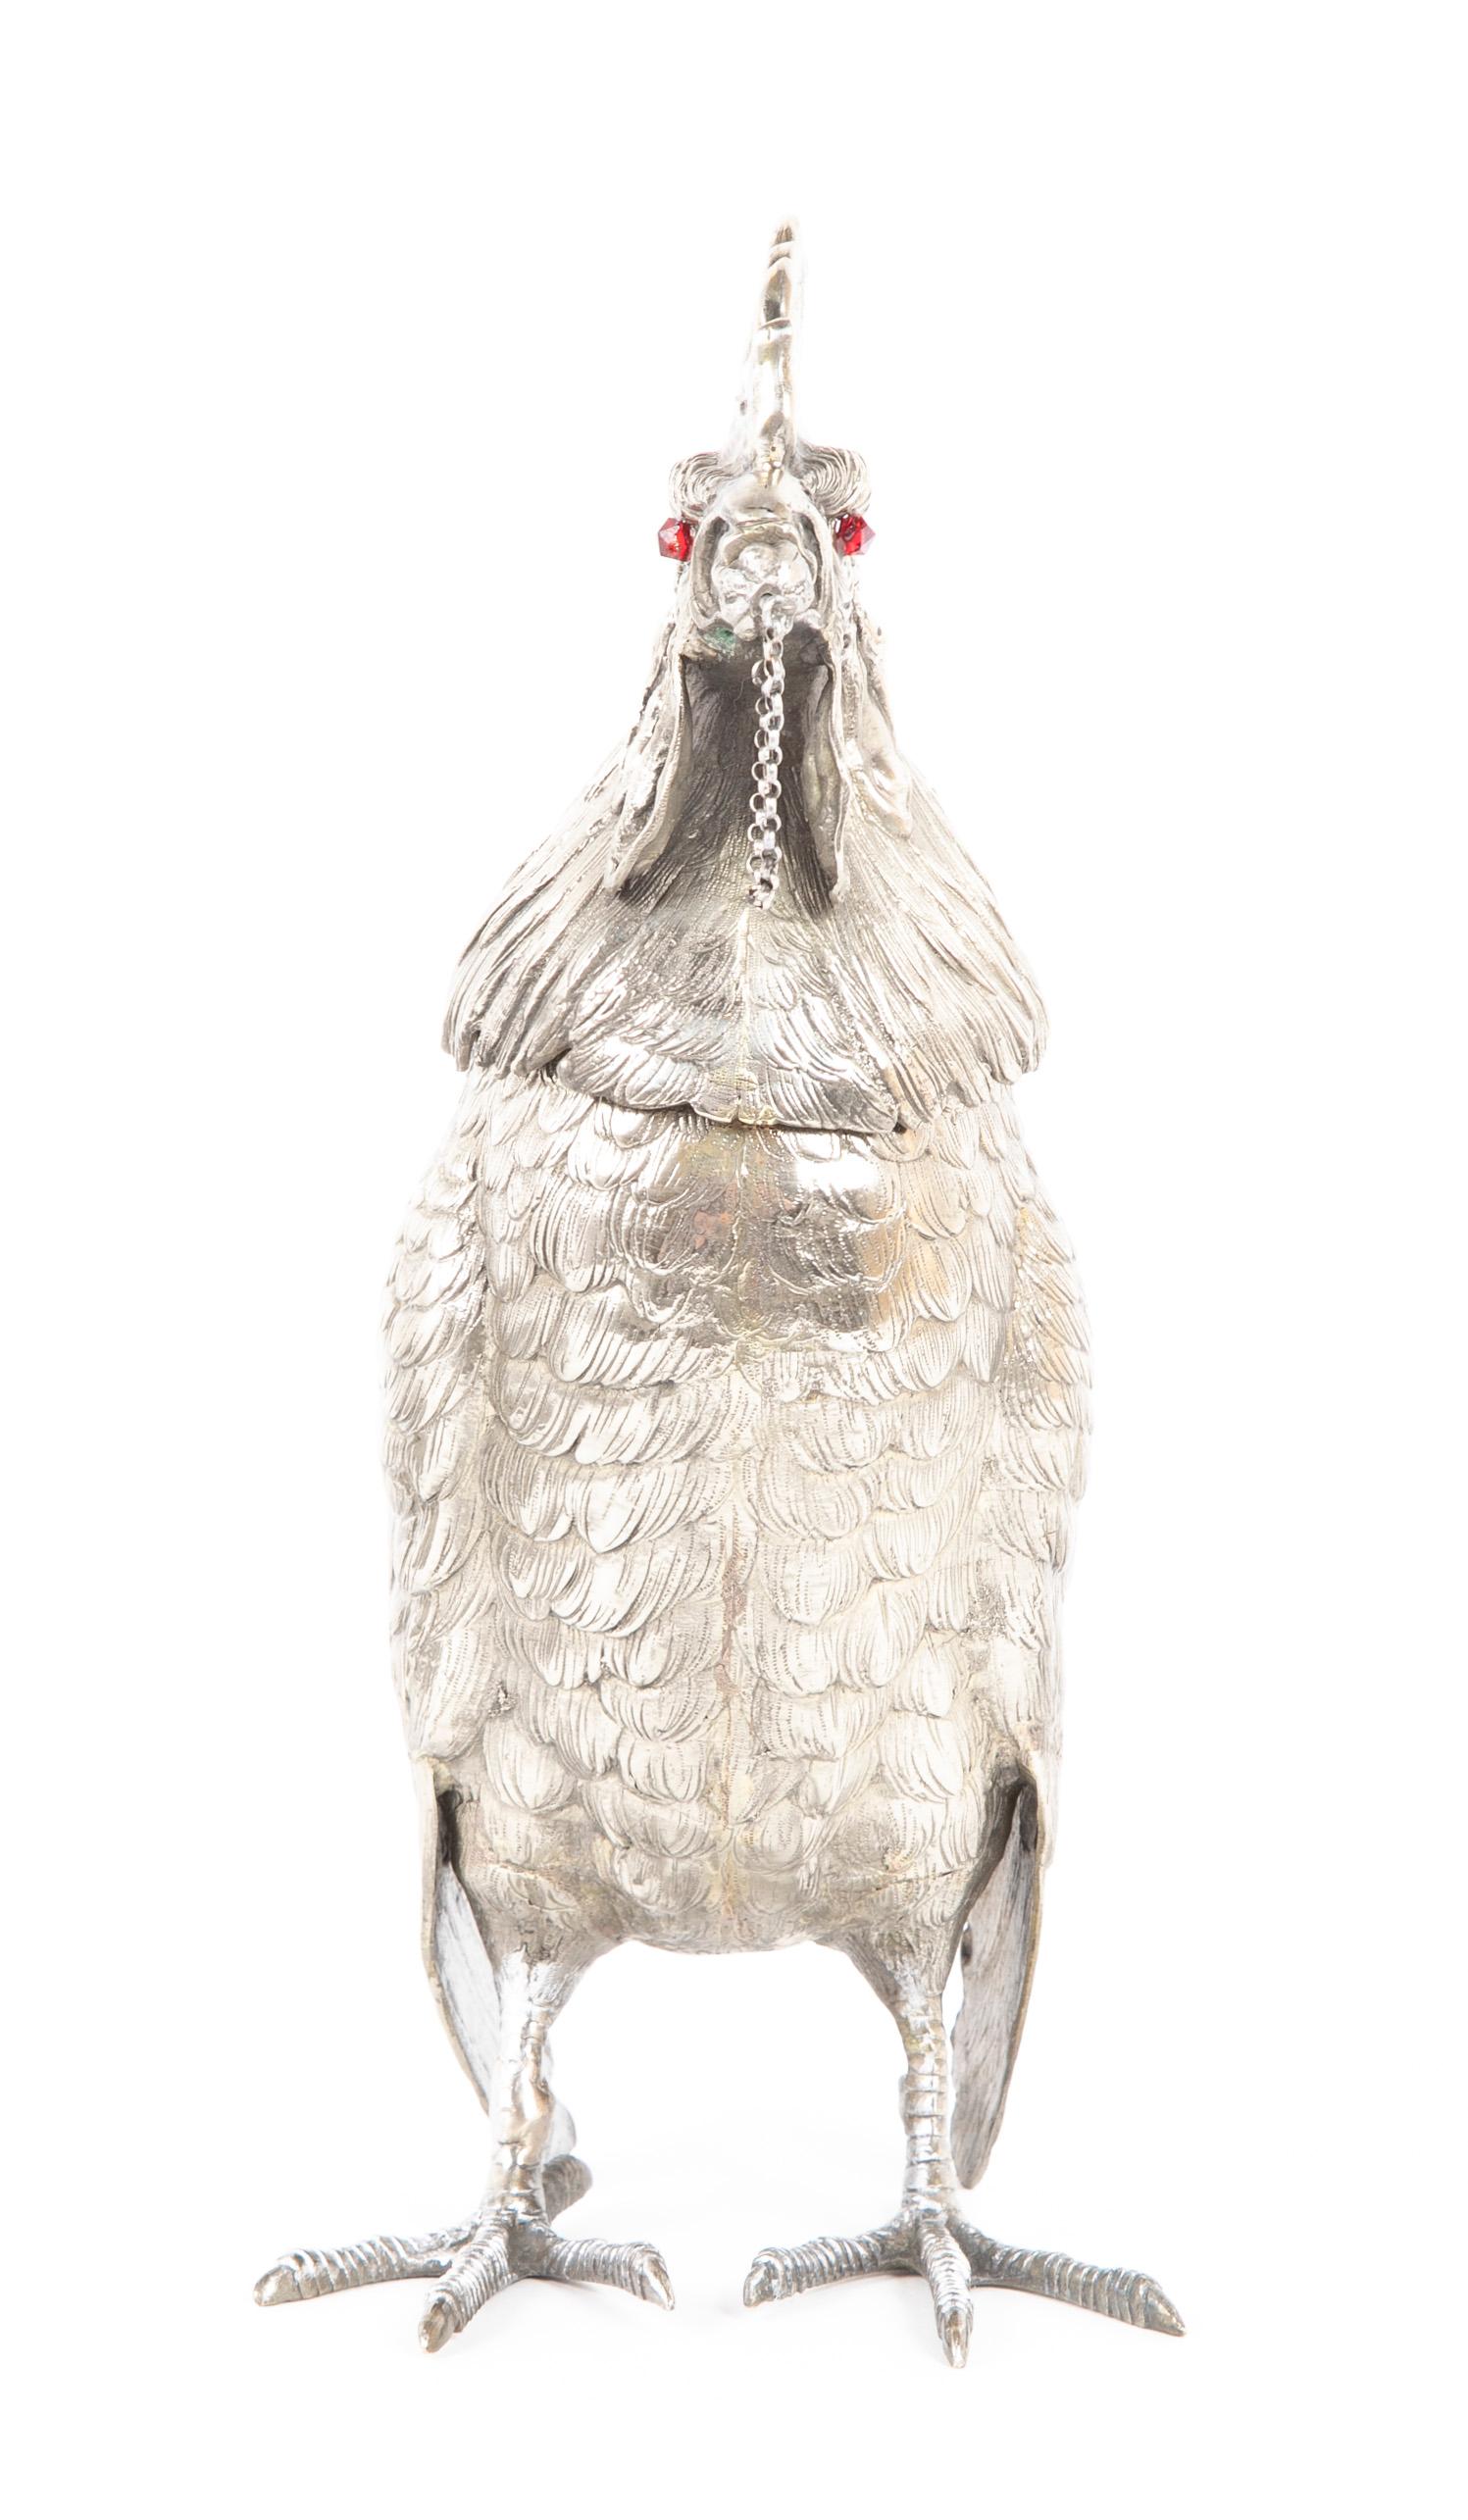 Rooster Cocktail Shaker by Ludwig Nersheimer 1